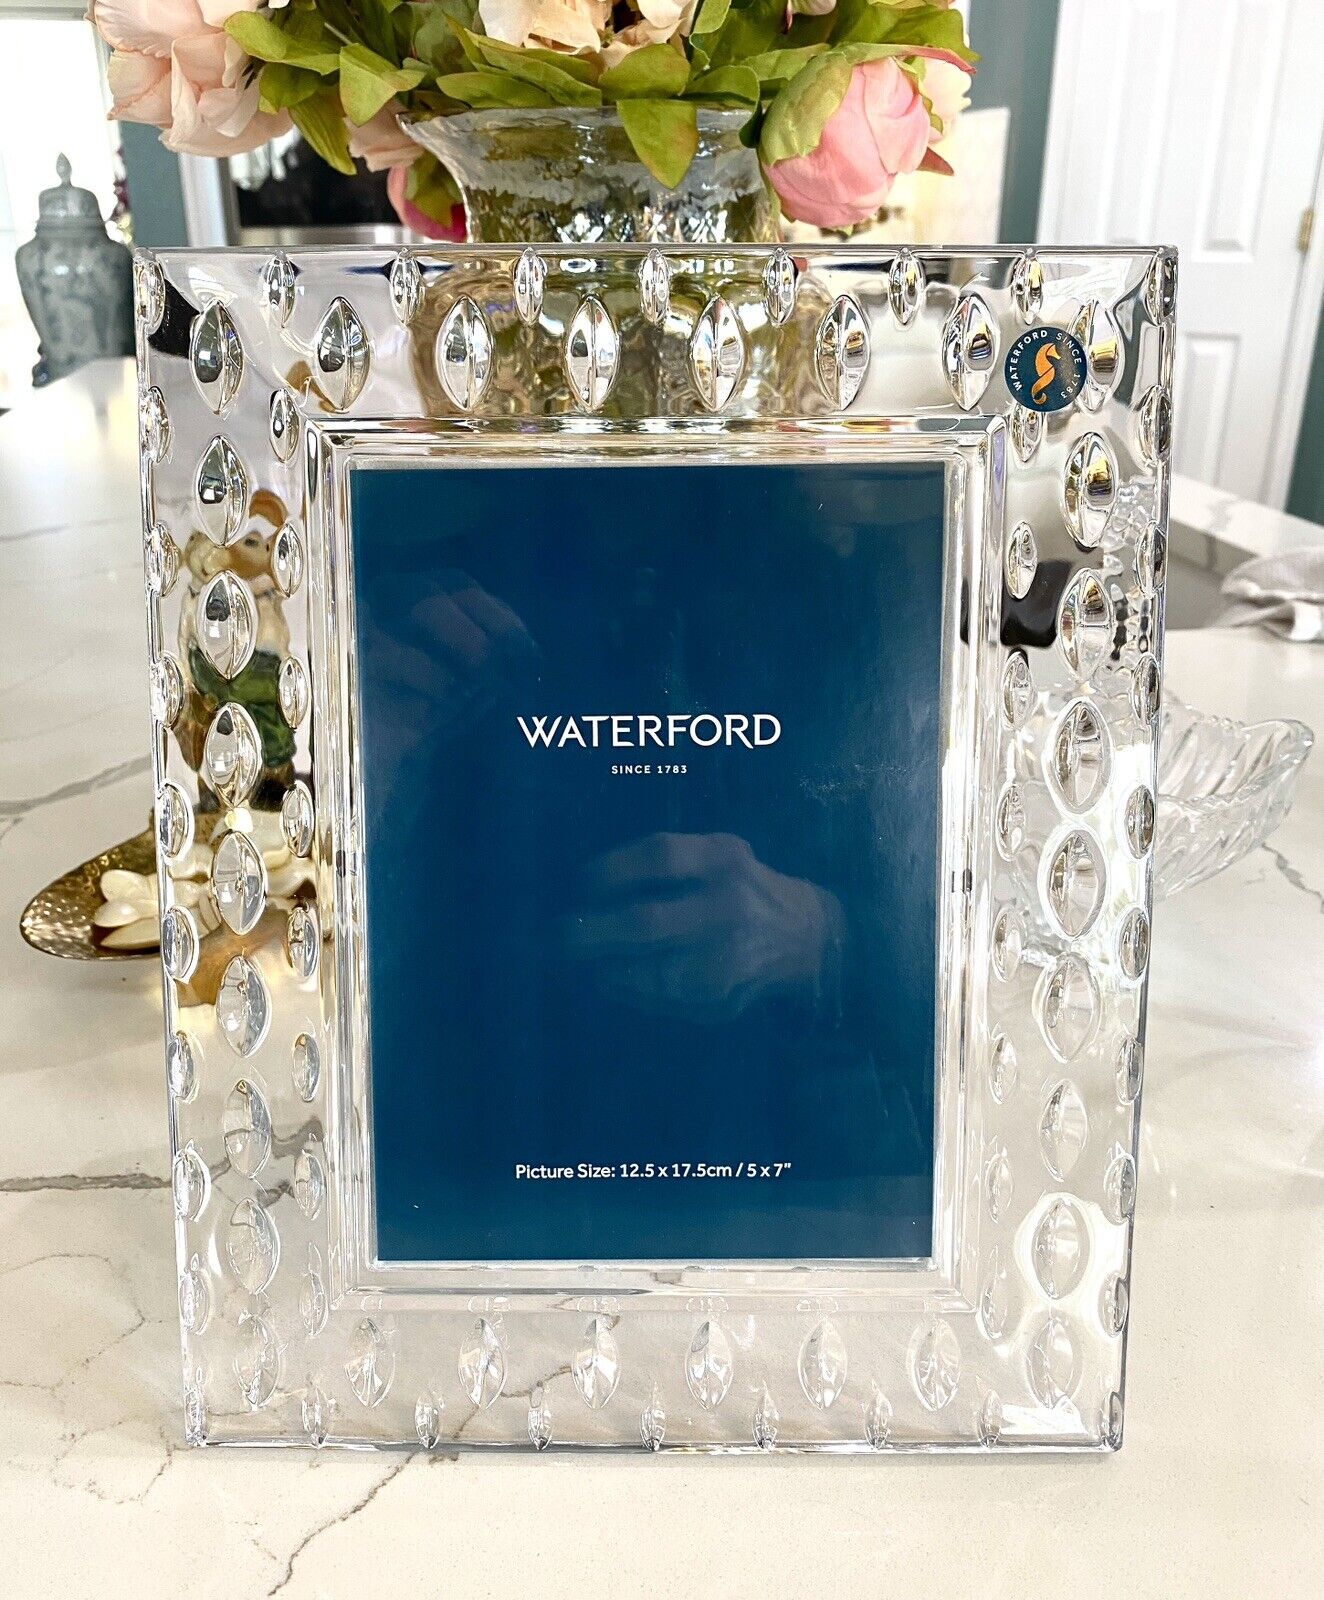 Waterford 5 x 7 Crystal Picture Frame Enis Collection Wedding Gift NIB